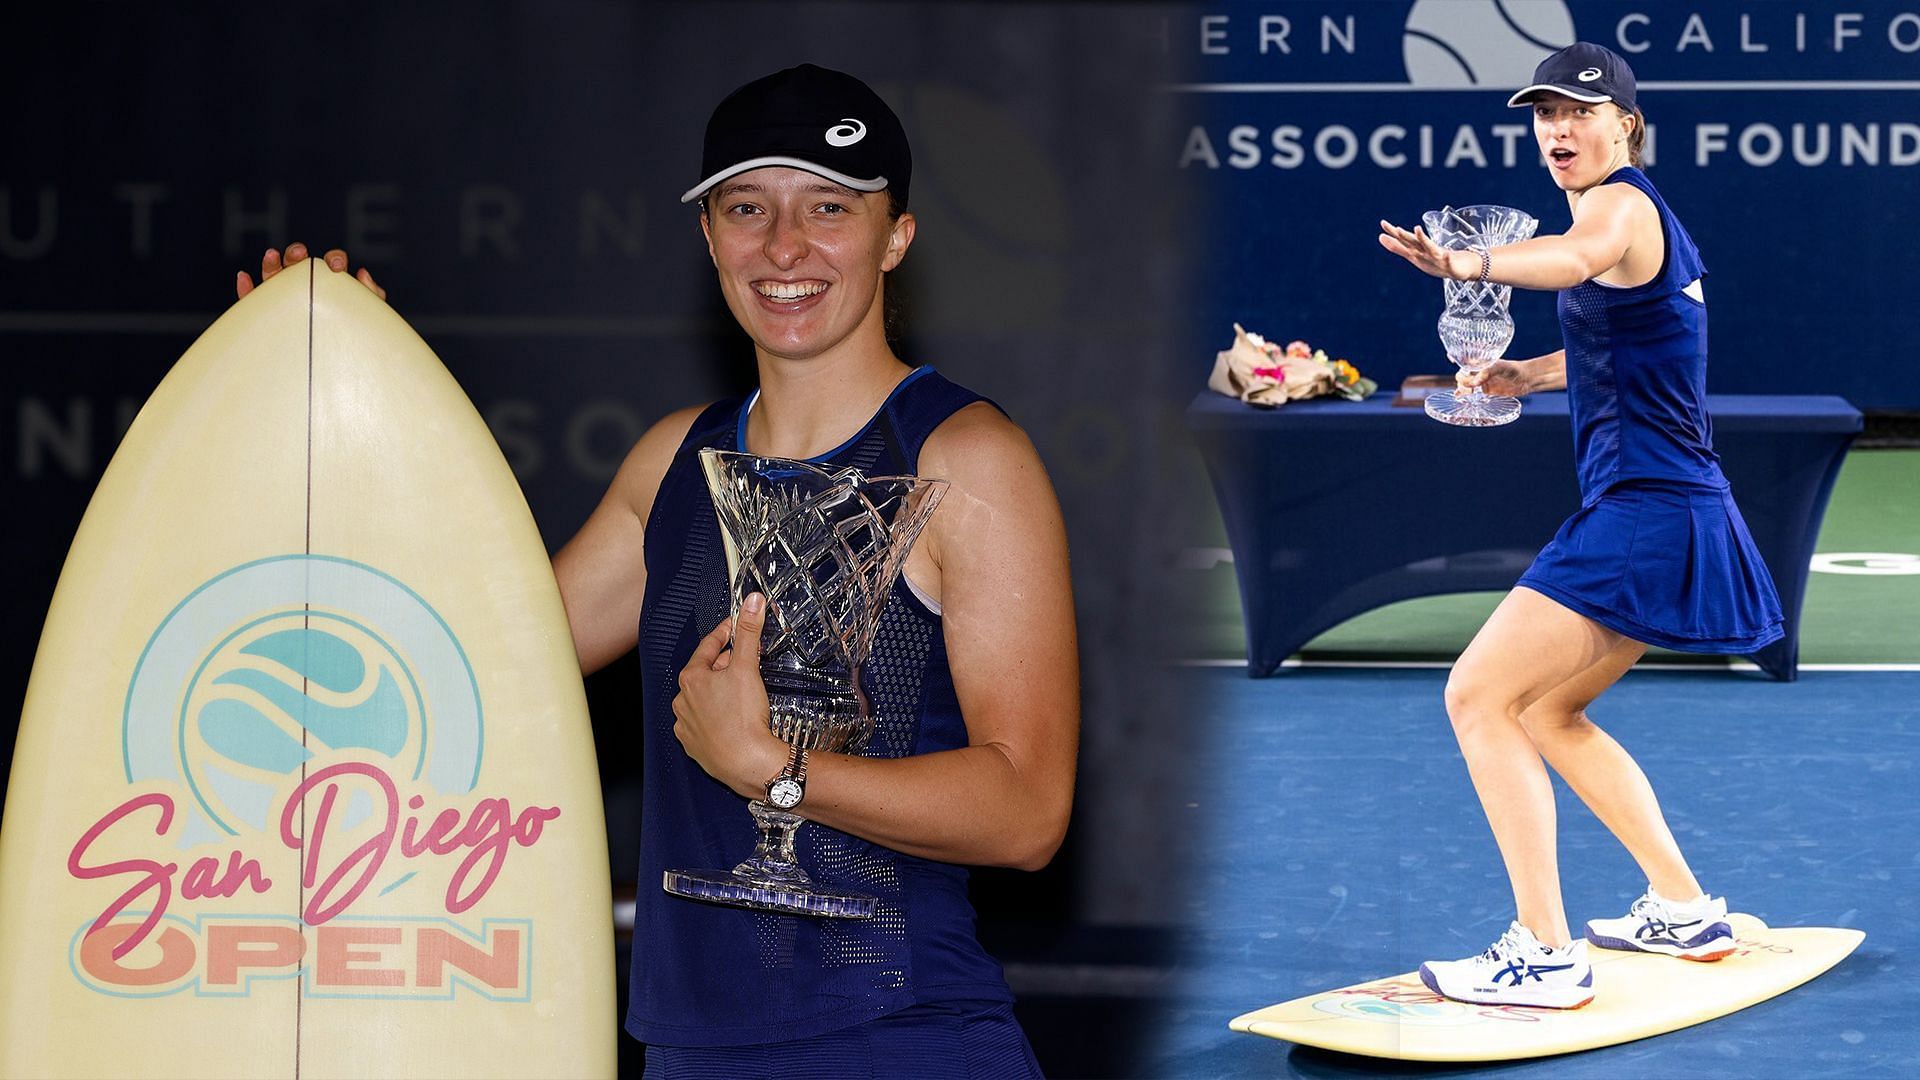 Iga Swiatek poses on the surfboard after winning the San Diego Open